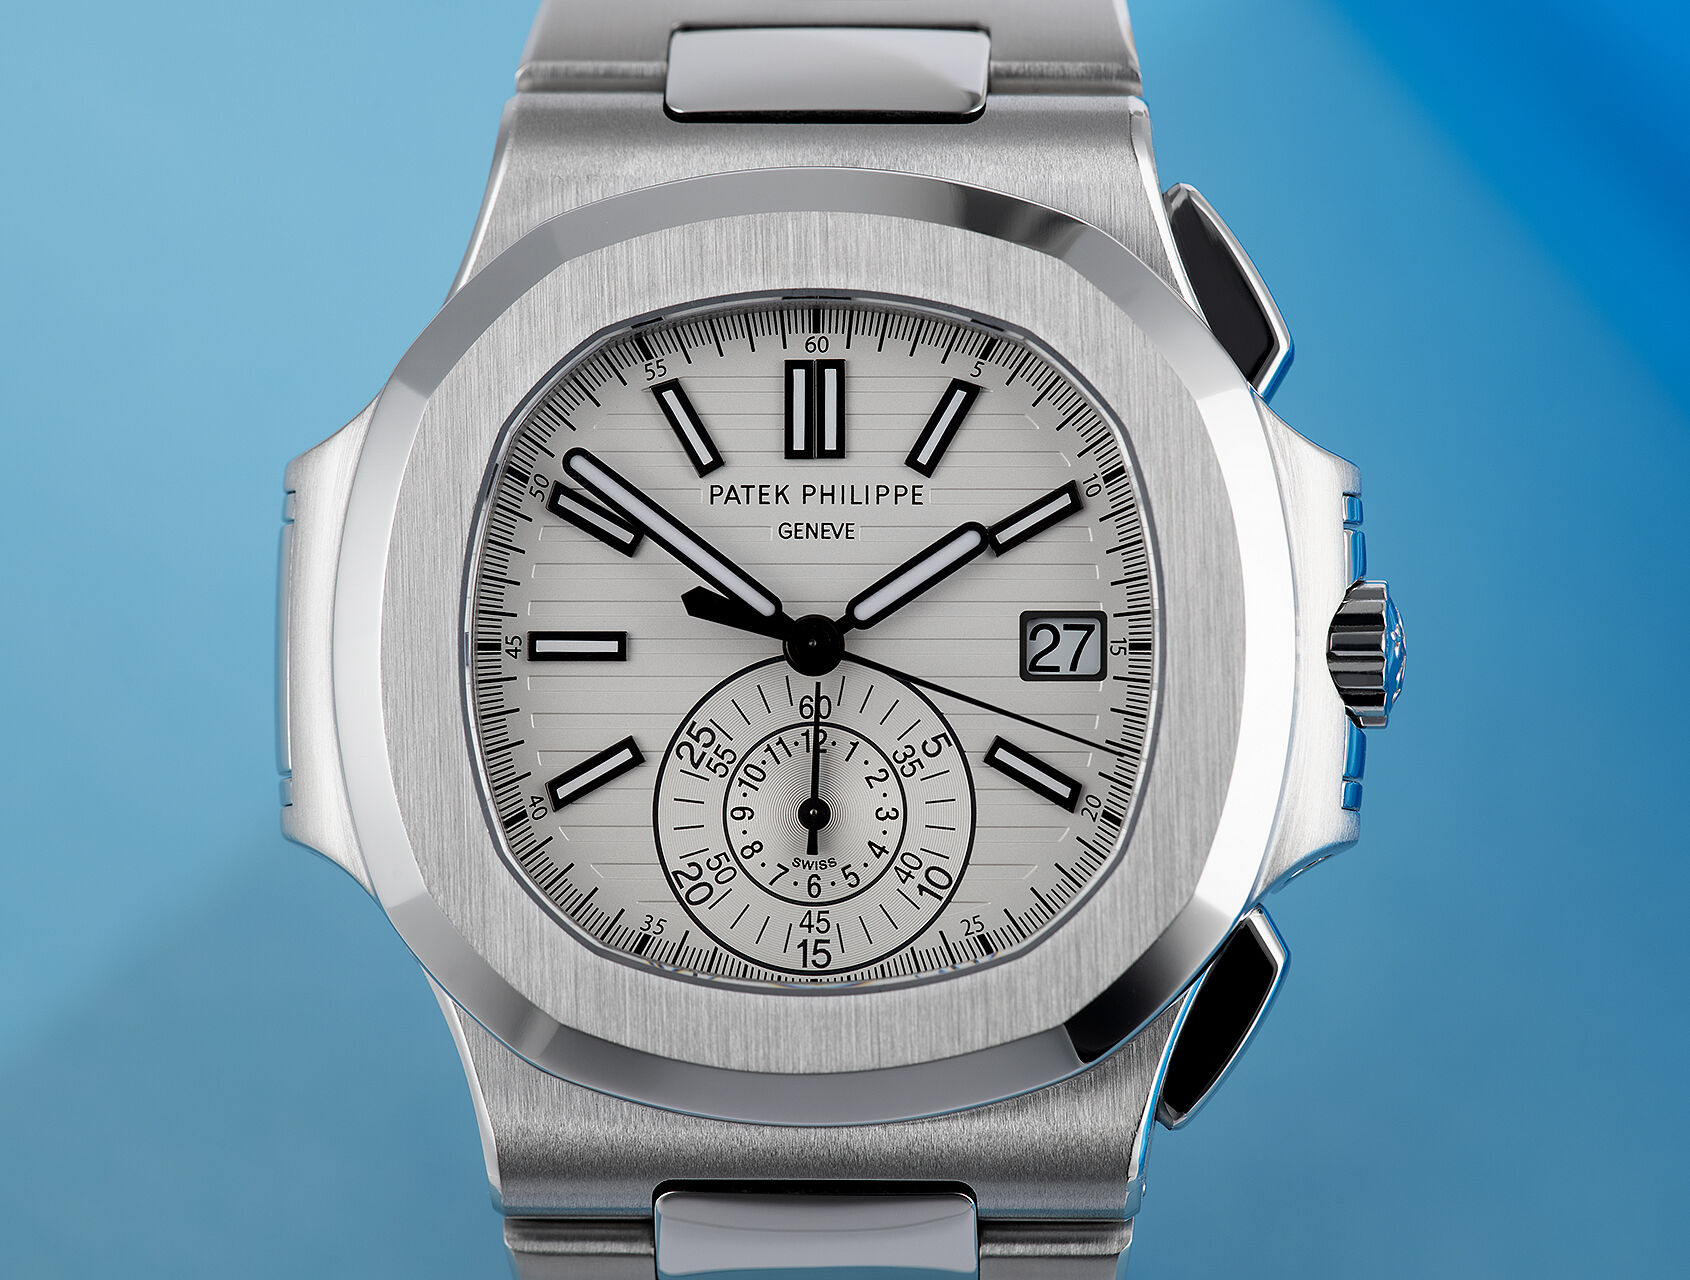 ref 5980/1A-019 | 5980/1A-019 - Fly-Back | Patek Philippe Nautilus Chronograph